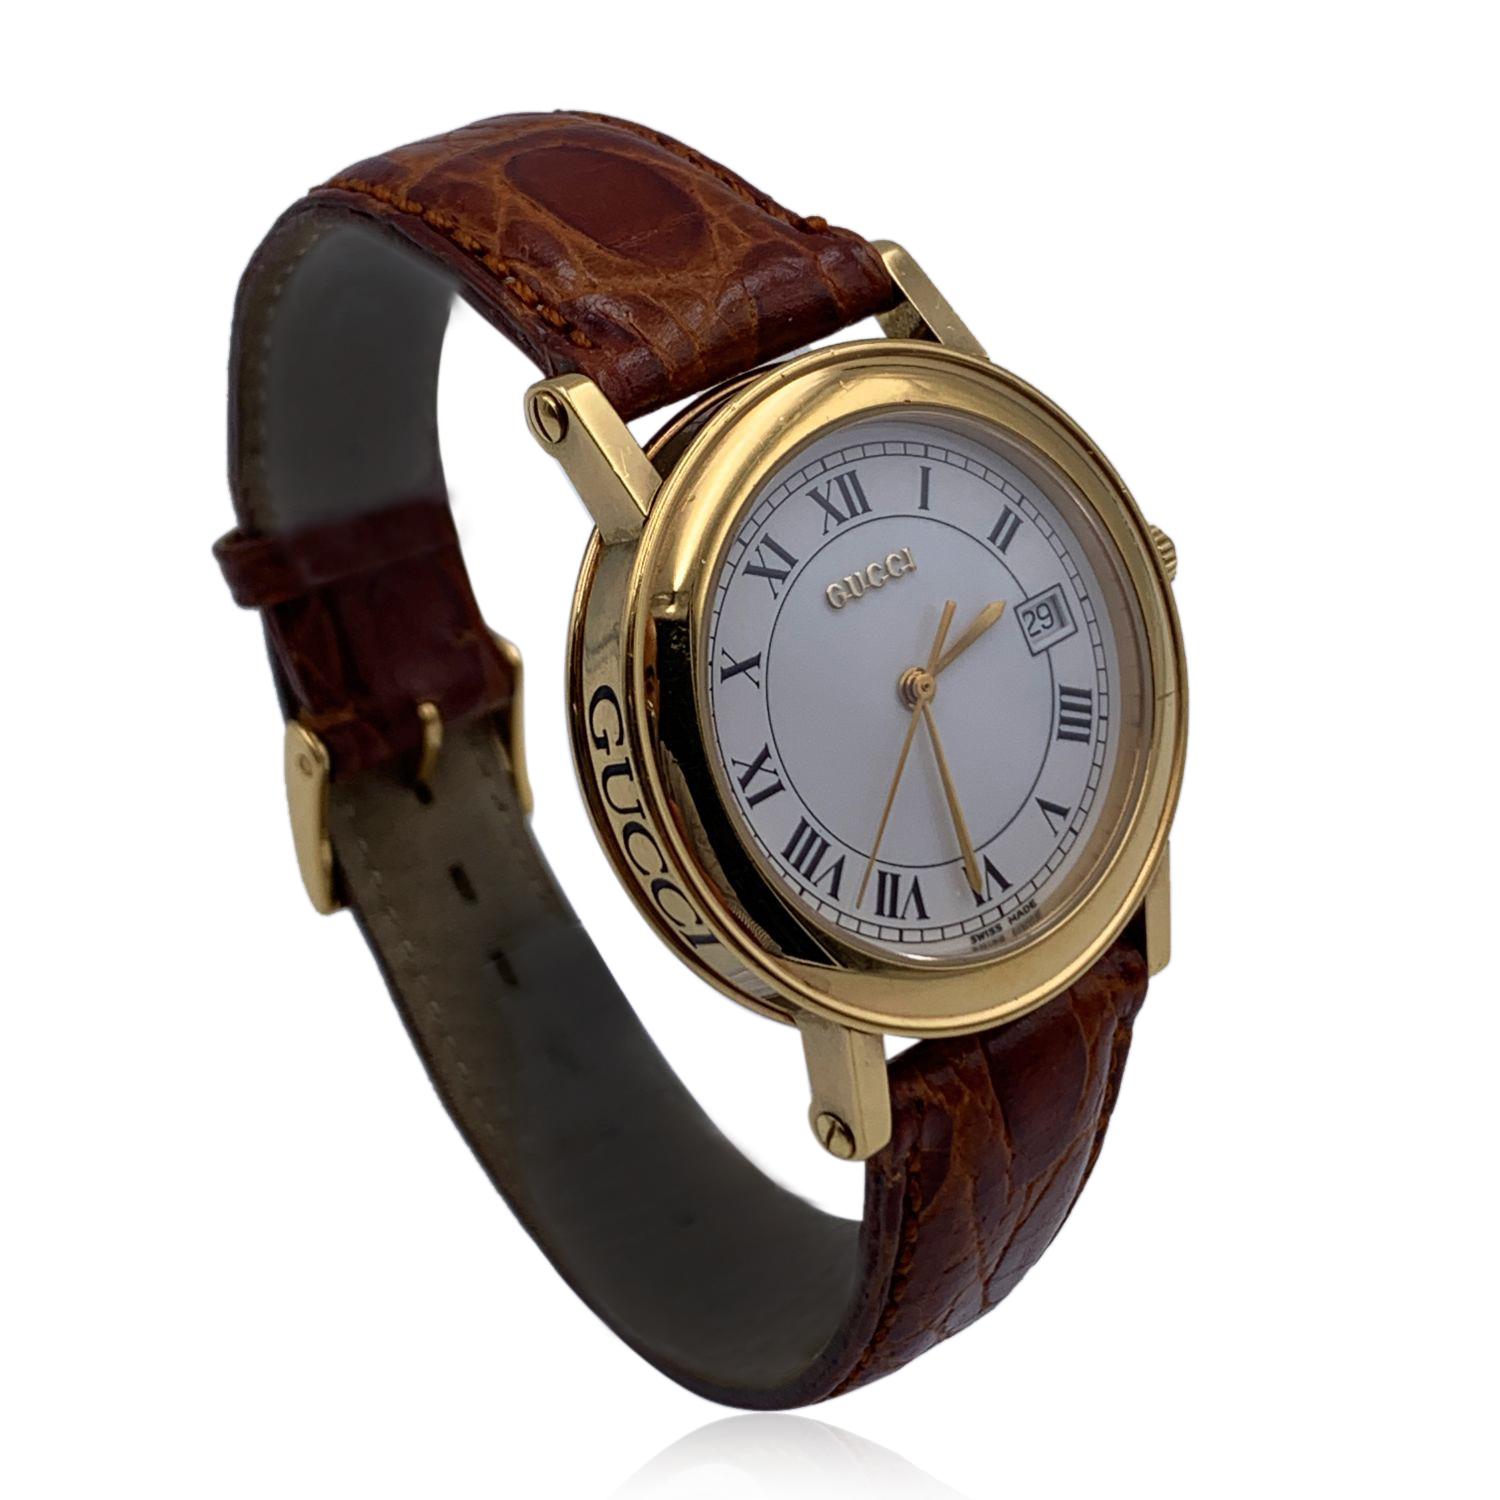 Beautiful vintage wristwatch by GUCCI. Round gold metal stainless steel case. White tone dial. Swiss Made Quartz Movement. Brown leather wrist strap with 7 holes adjustment. GG - GUCCI buckle. Roman numbers. Date indicator at 3 o'clock. 'GUCCI'